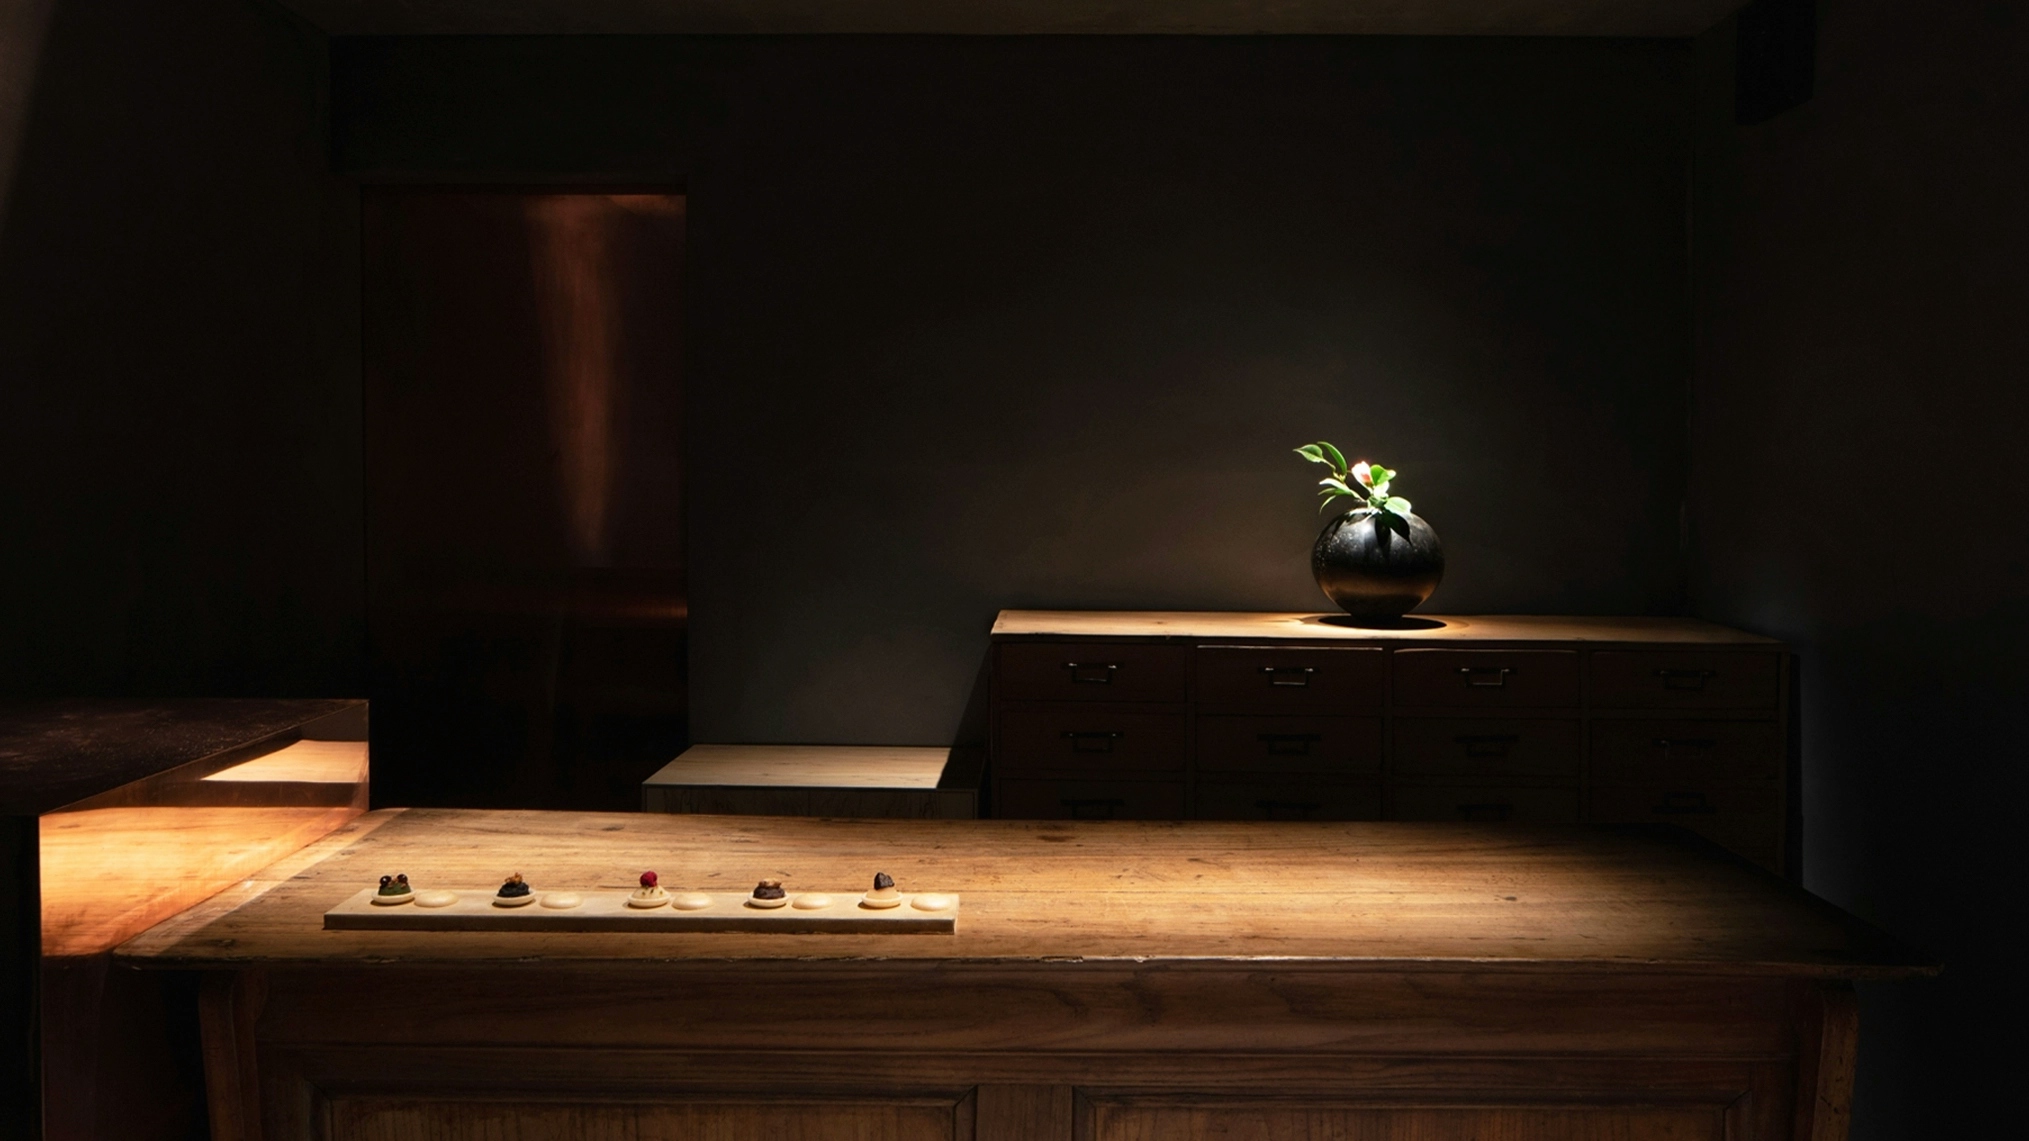 A dark room with a low wooden counter in the foreground has a long, thin plate with five sweets delicately placed atop. In the background a dark vase sits in the shadows with a refined floral arrangement